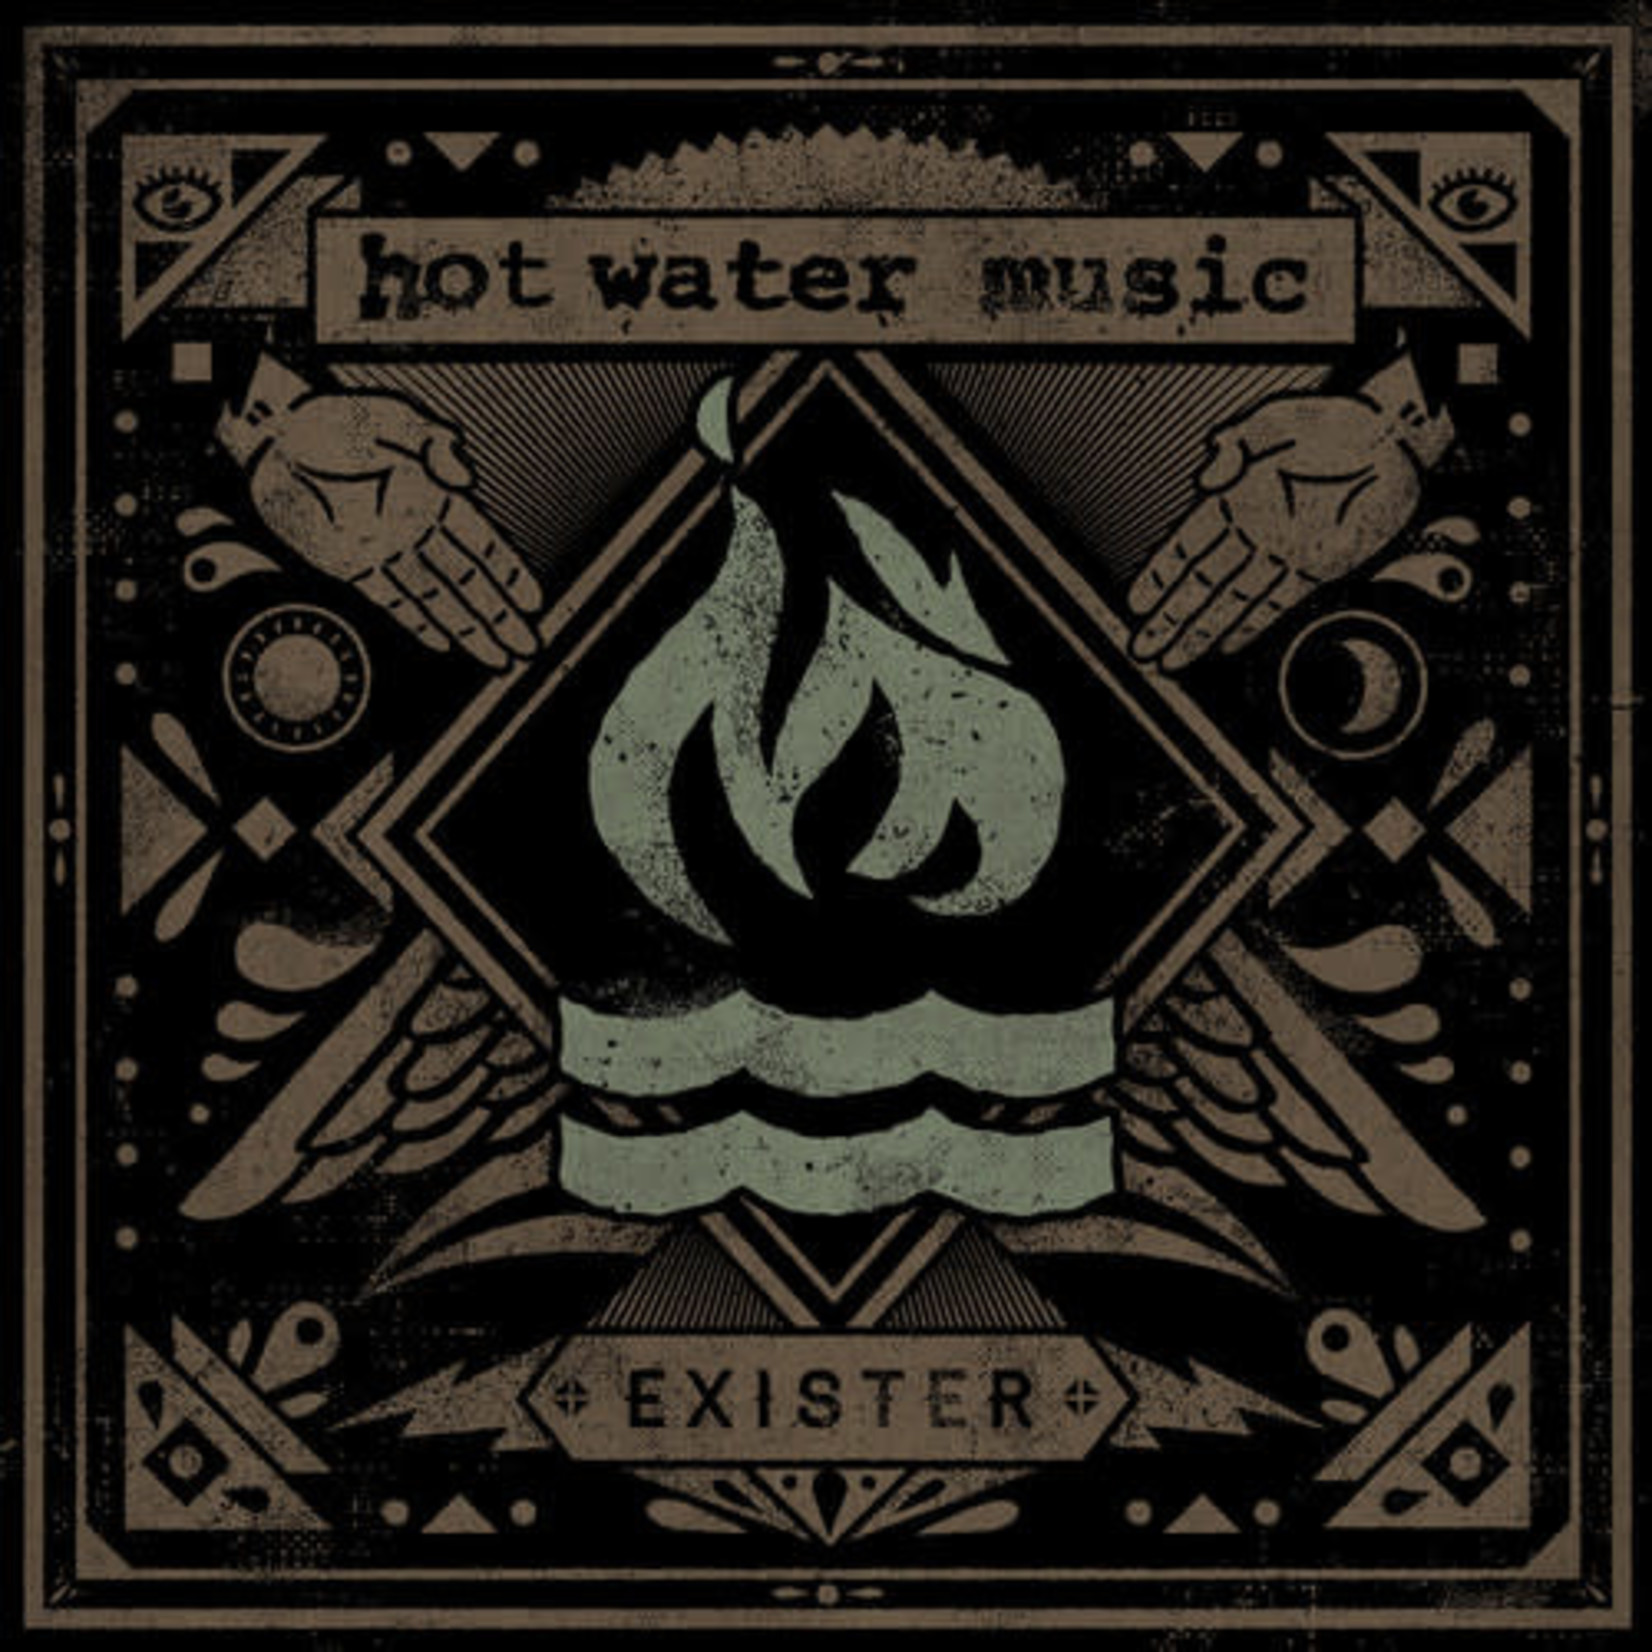 Hot Water Music - Exister [CD]